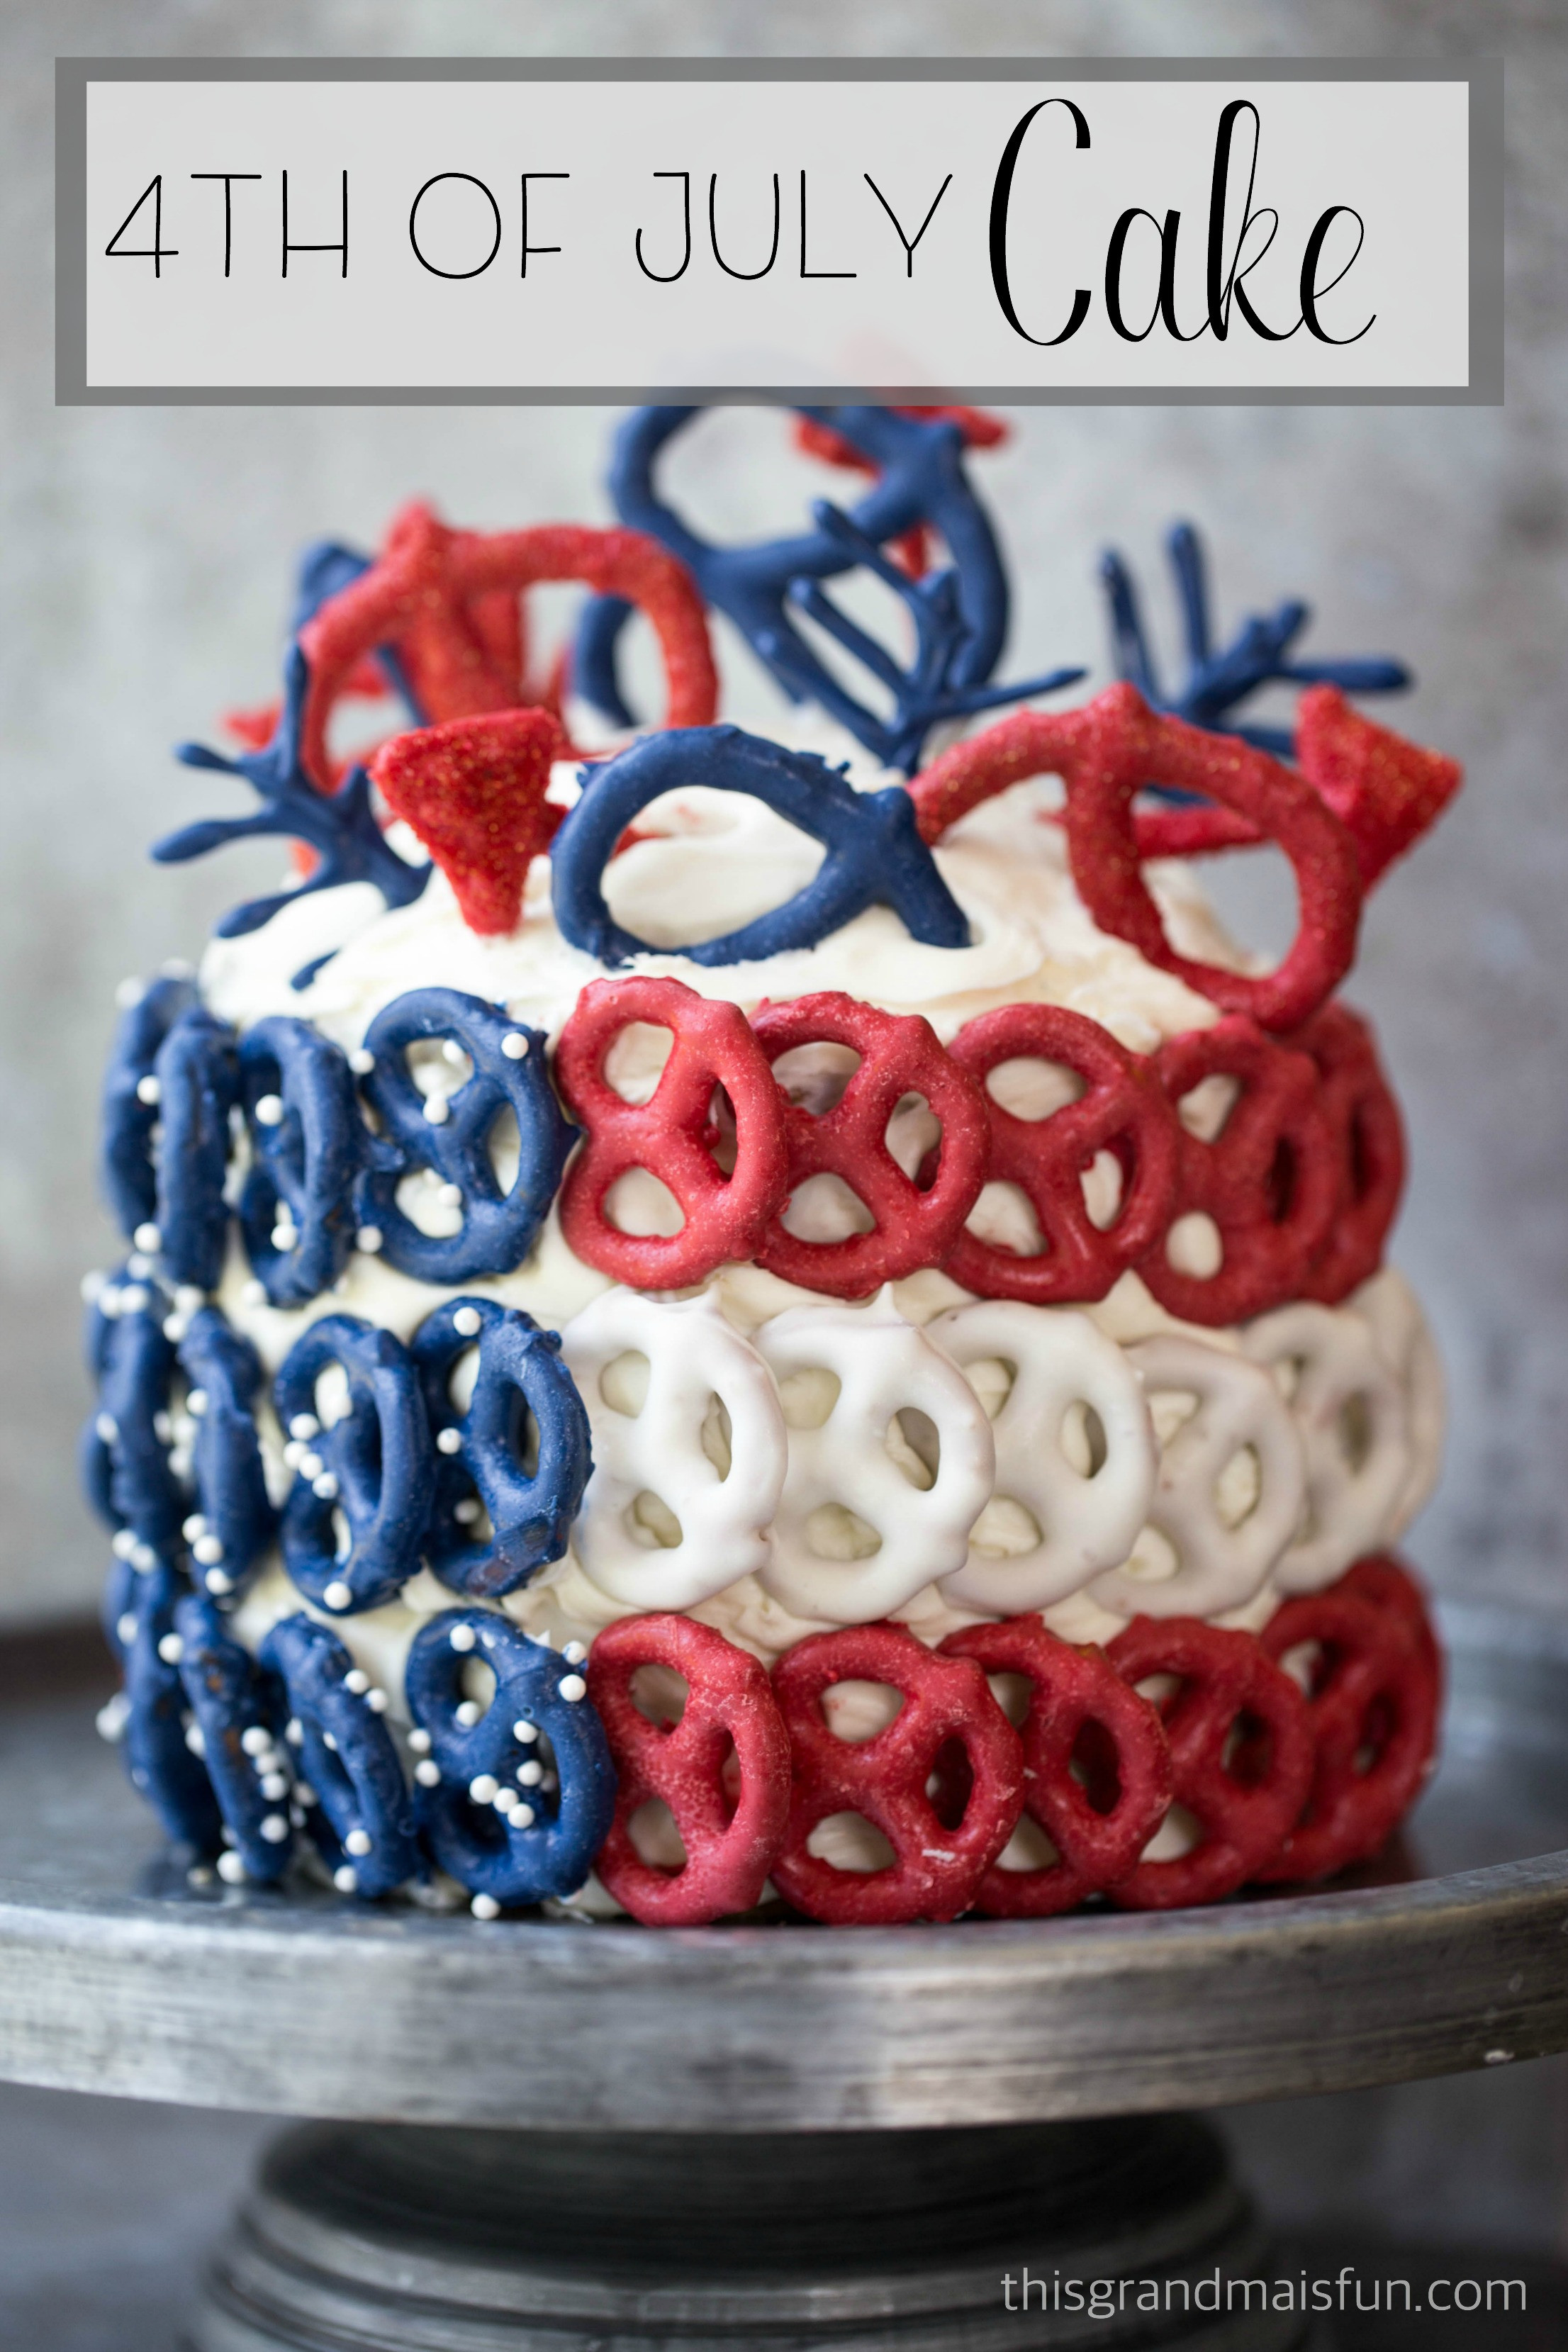 4Th Of July Cake Recipes
 4th of July Cake TGIF This Grandma is Fun